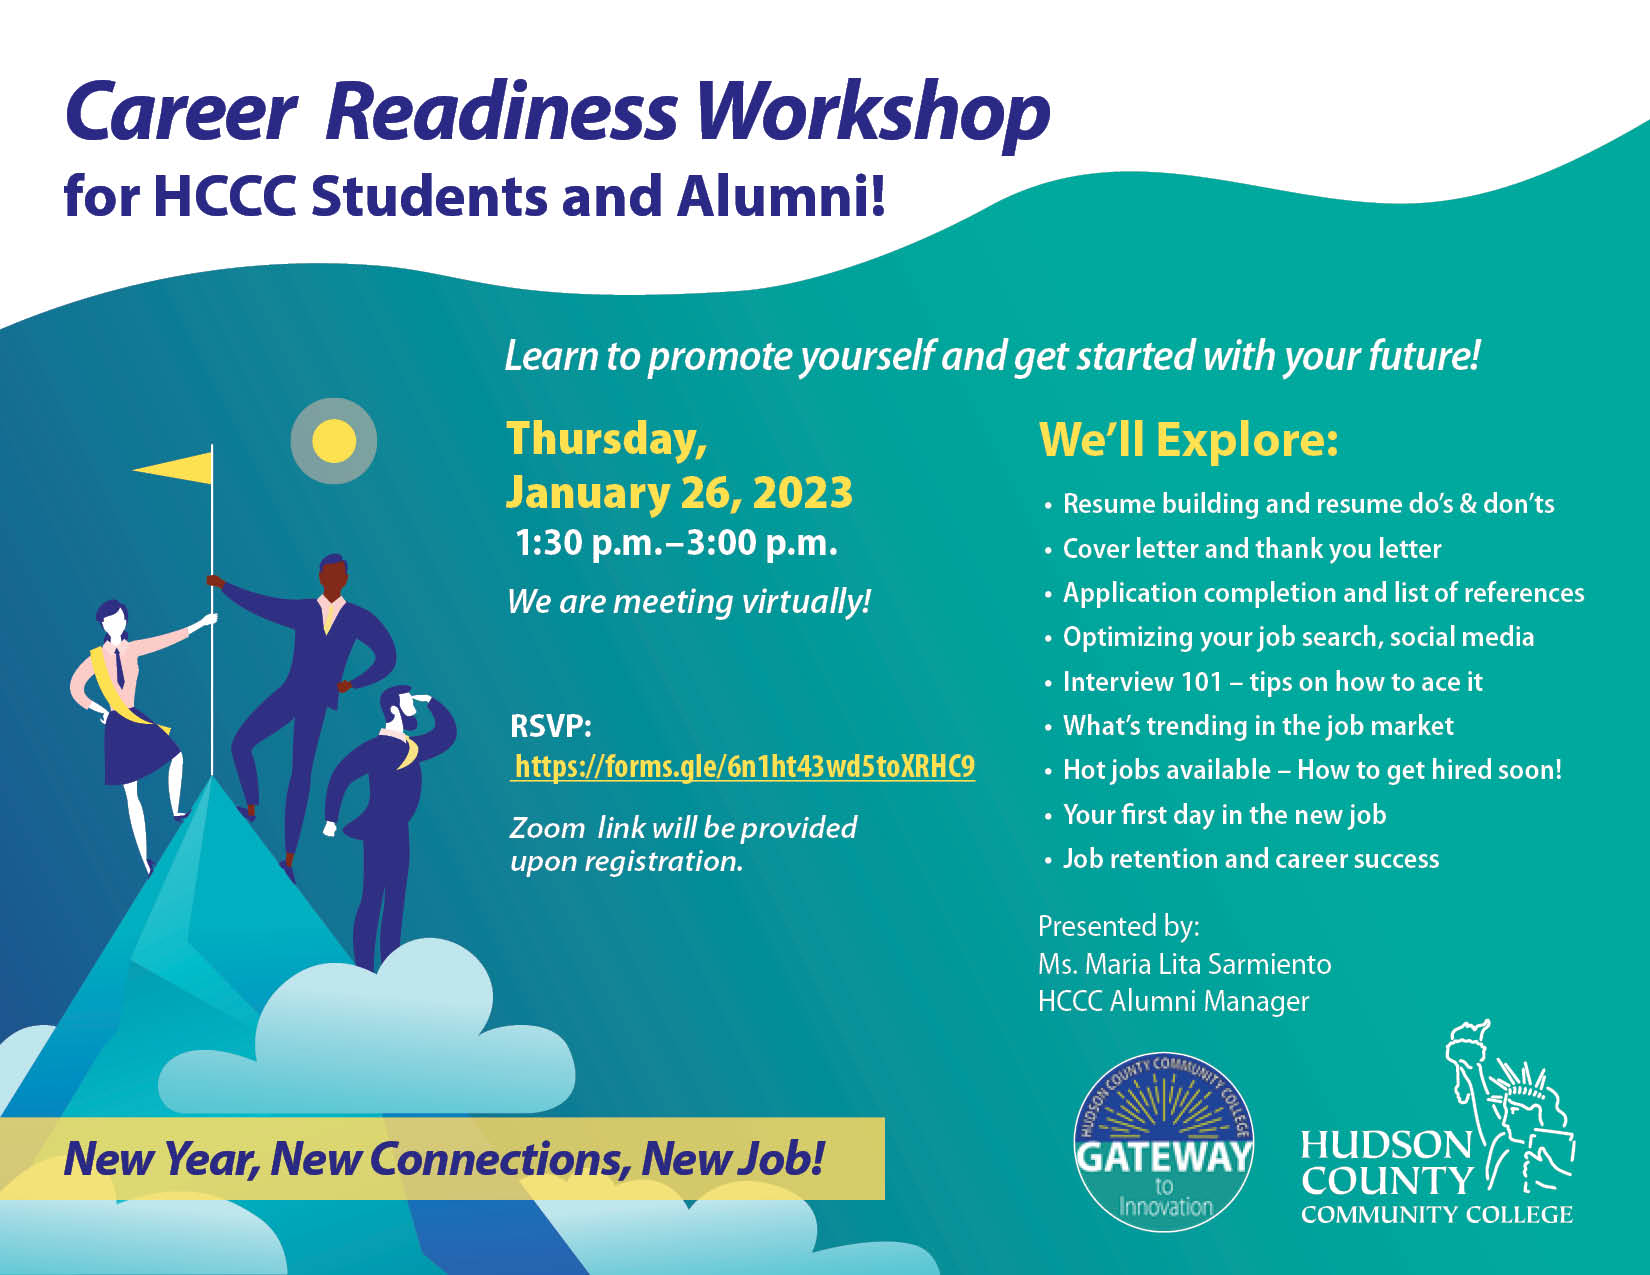 Career Readiness Workshop for HCCC Students and Alumni!